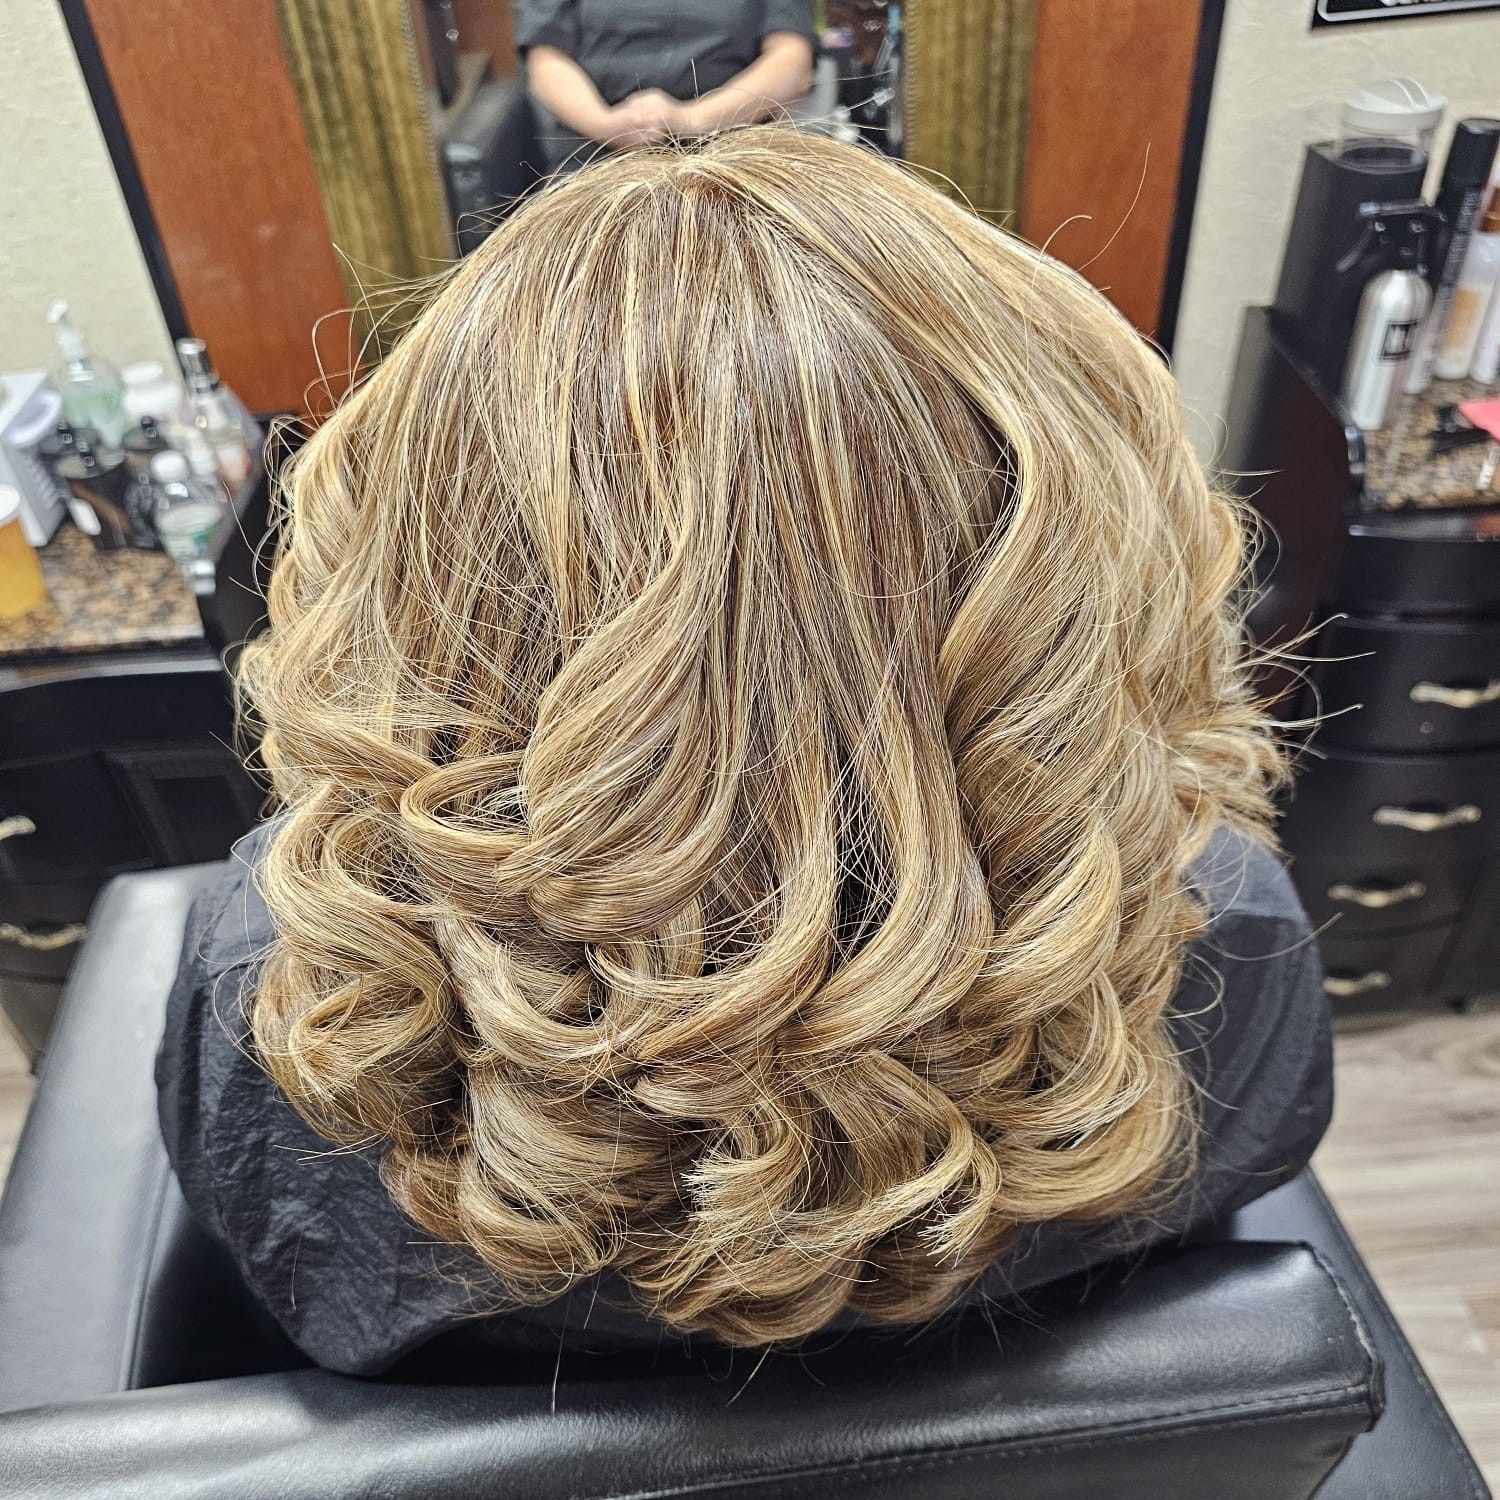 Haircut & Blow-dry promotion Monday, Tuesday, Wed. portfolio